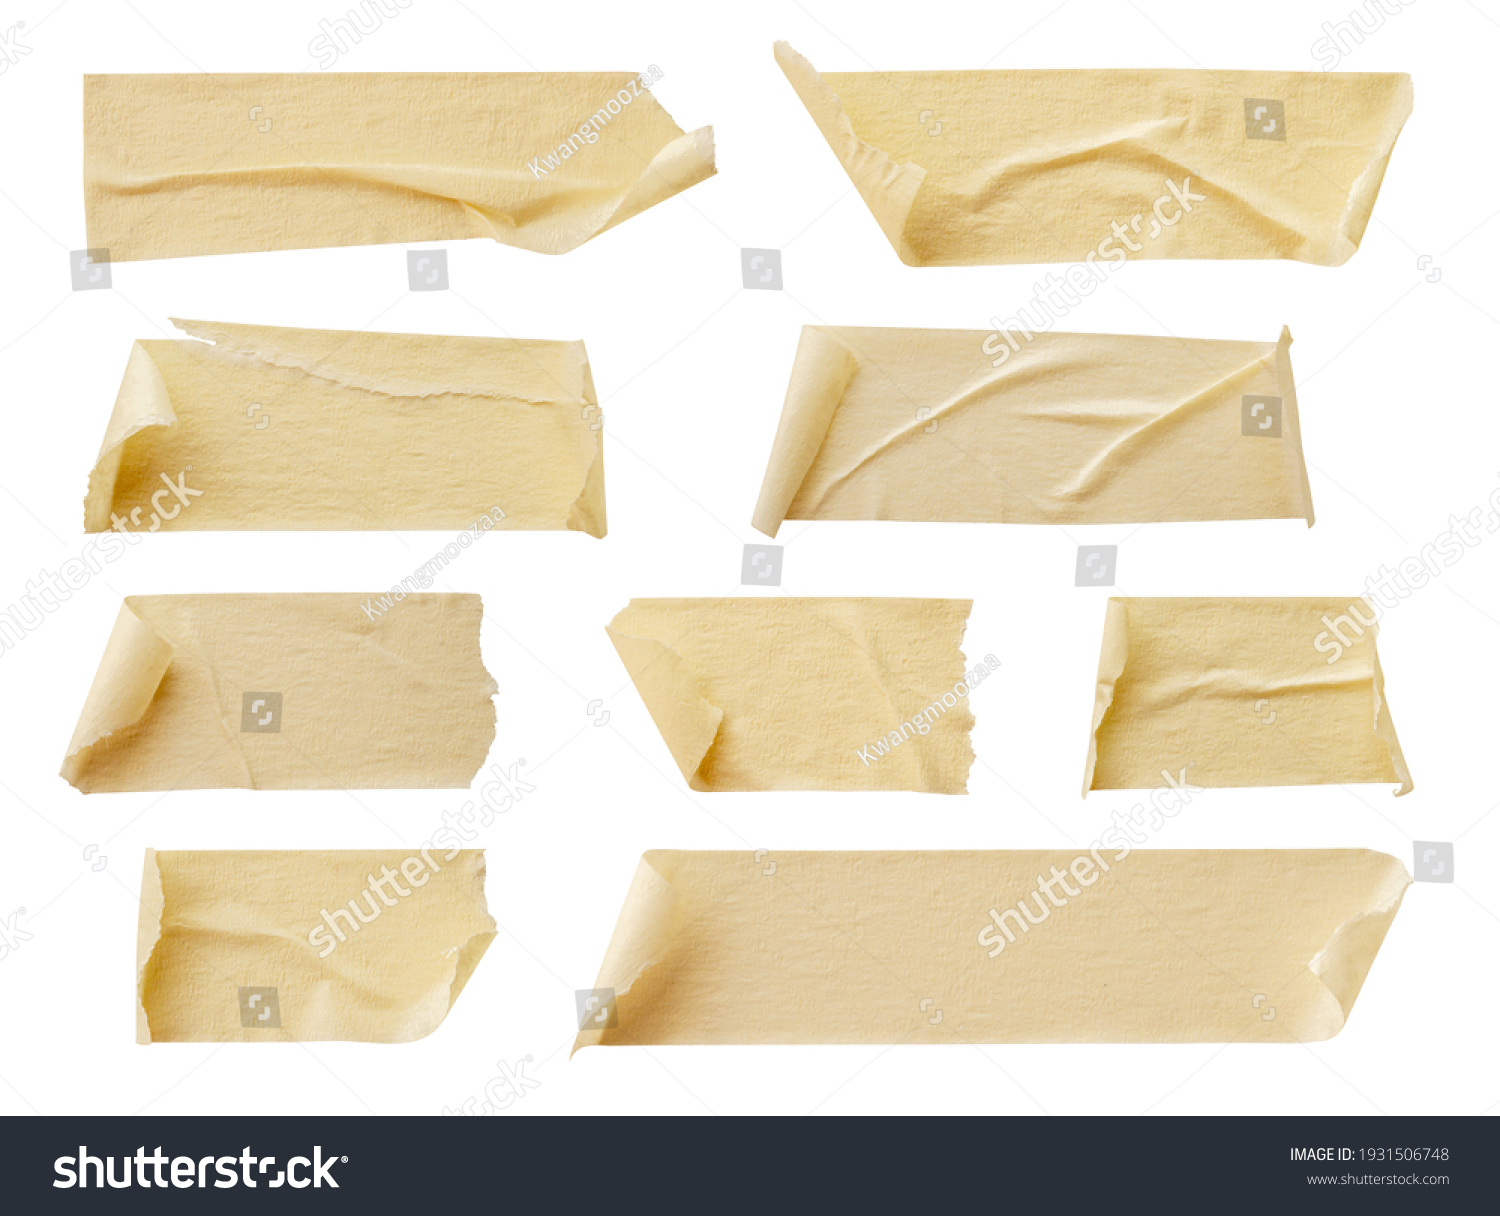 Yellow adhesive paper tape isolated on white background #1931506748